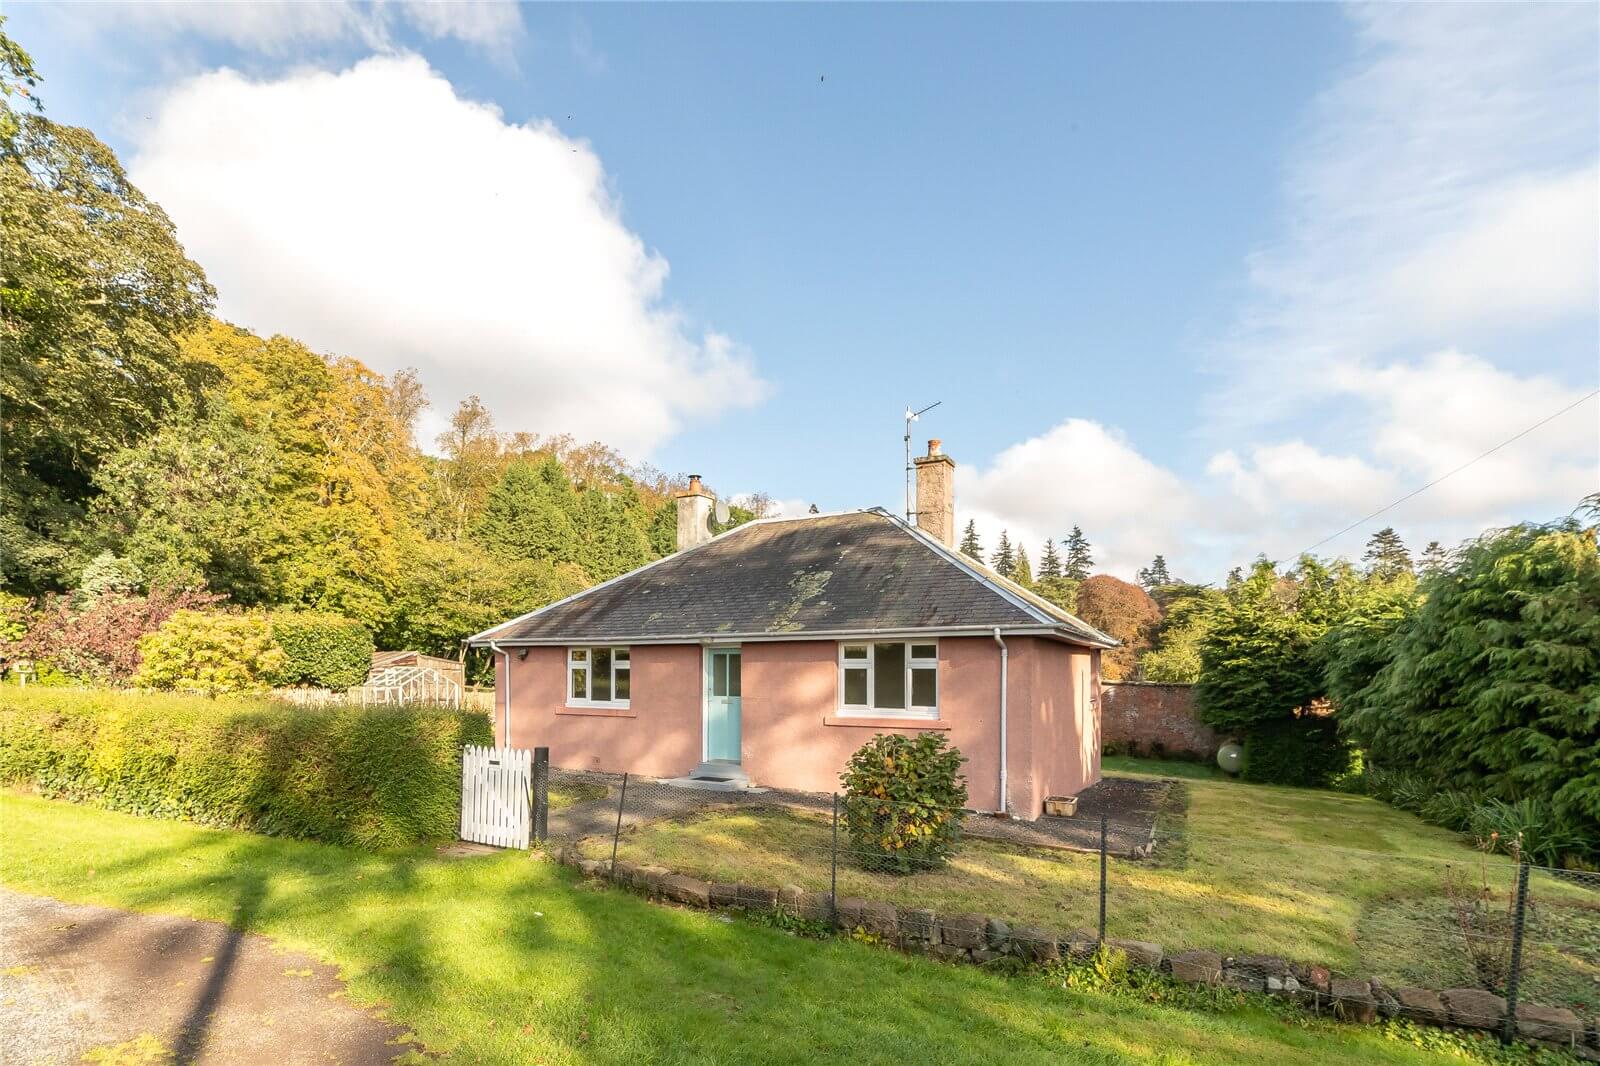 Our latest properties for sale and to let (21st October 2019)